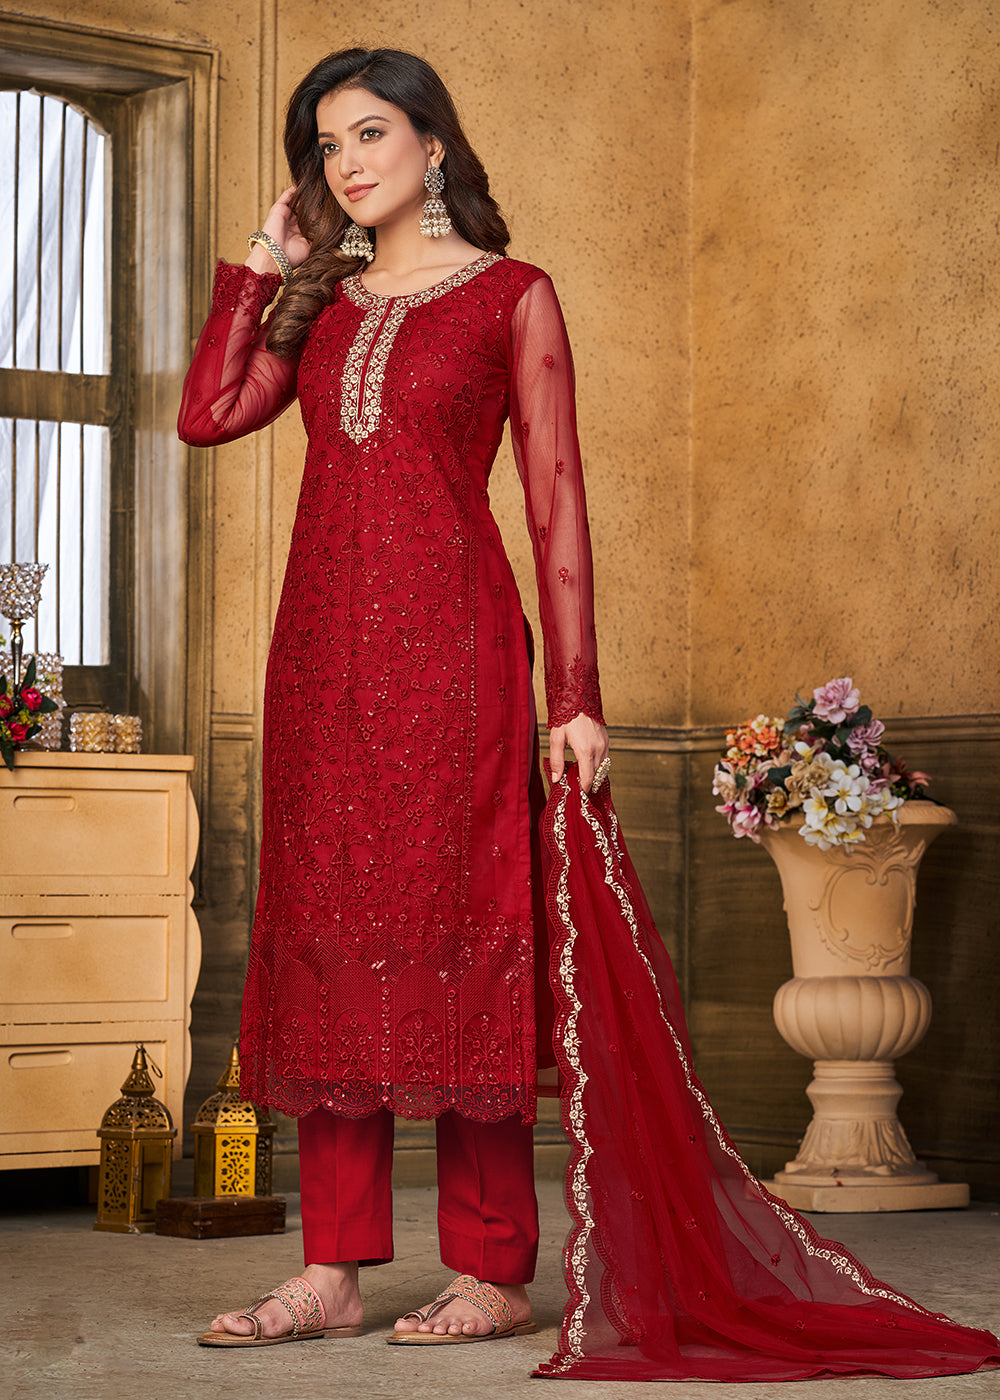 Buy Now Festive Party Red Net Embroidered Trendy Salwar Suit Online in USA, UK, Canada, Germany, Australia & Worldwide at Empress Clothing. 